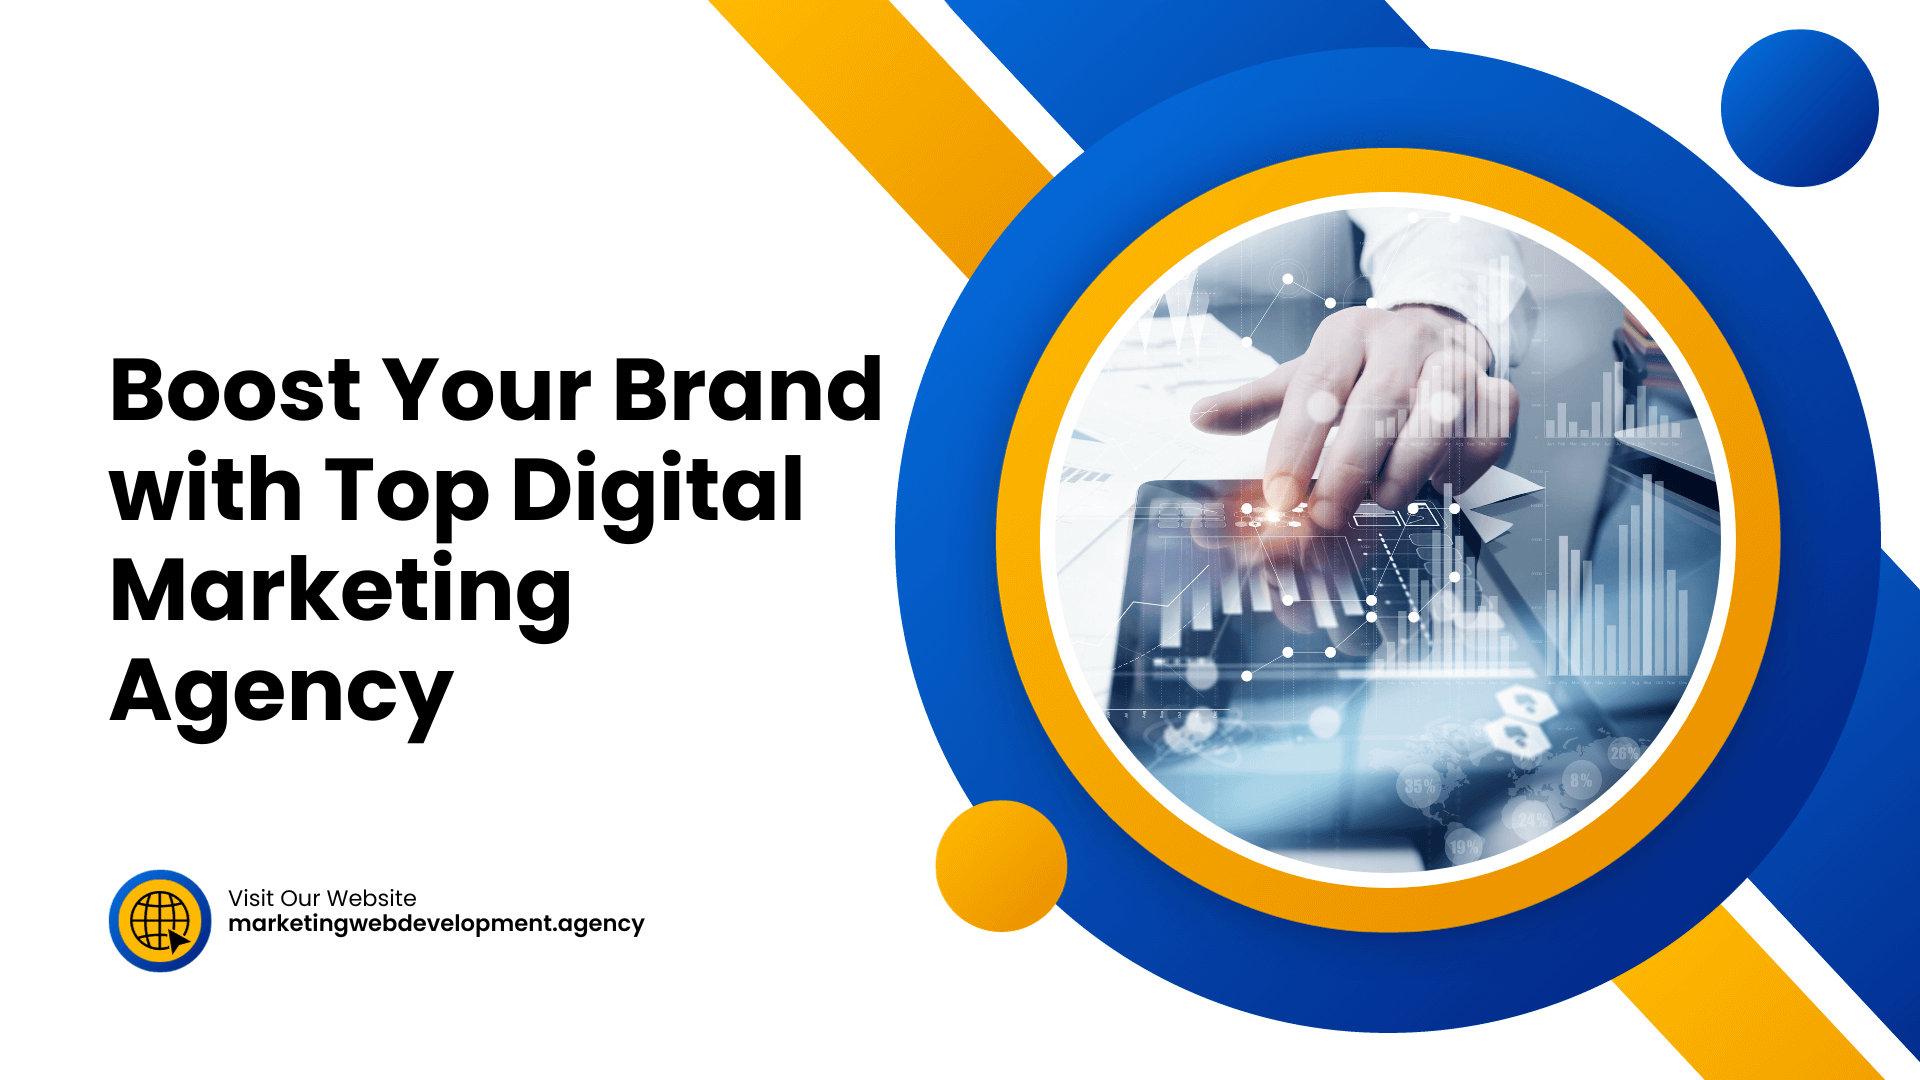 Boost Your Brand with Top Digital Marketing Agency